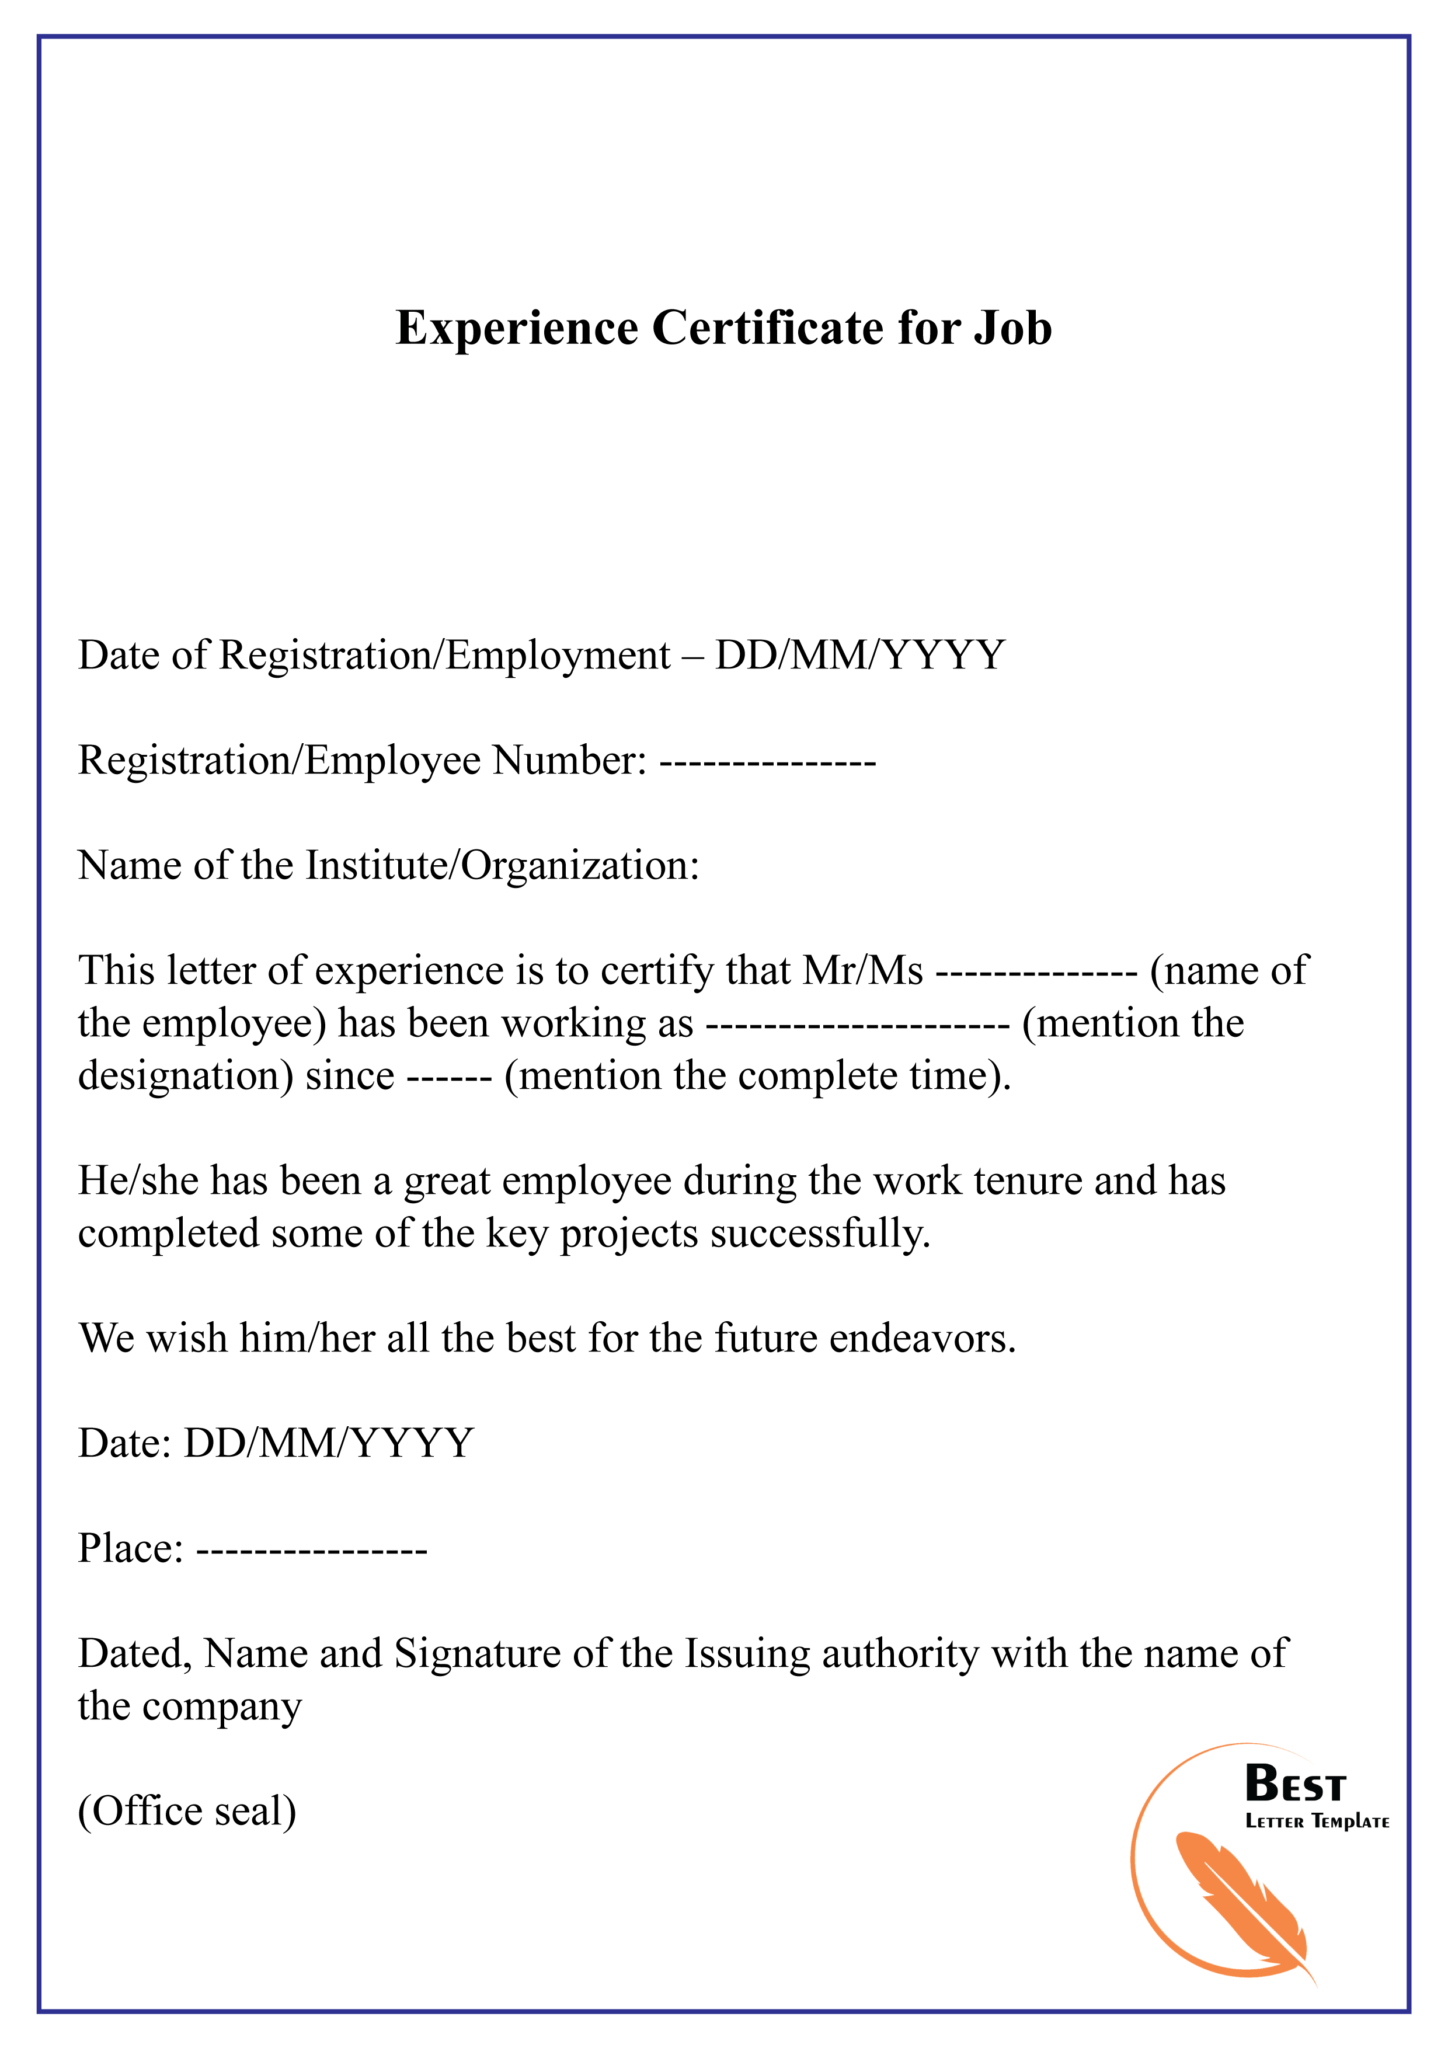 requesting employer to send experience certificate green card format